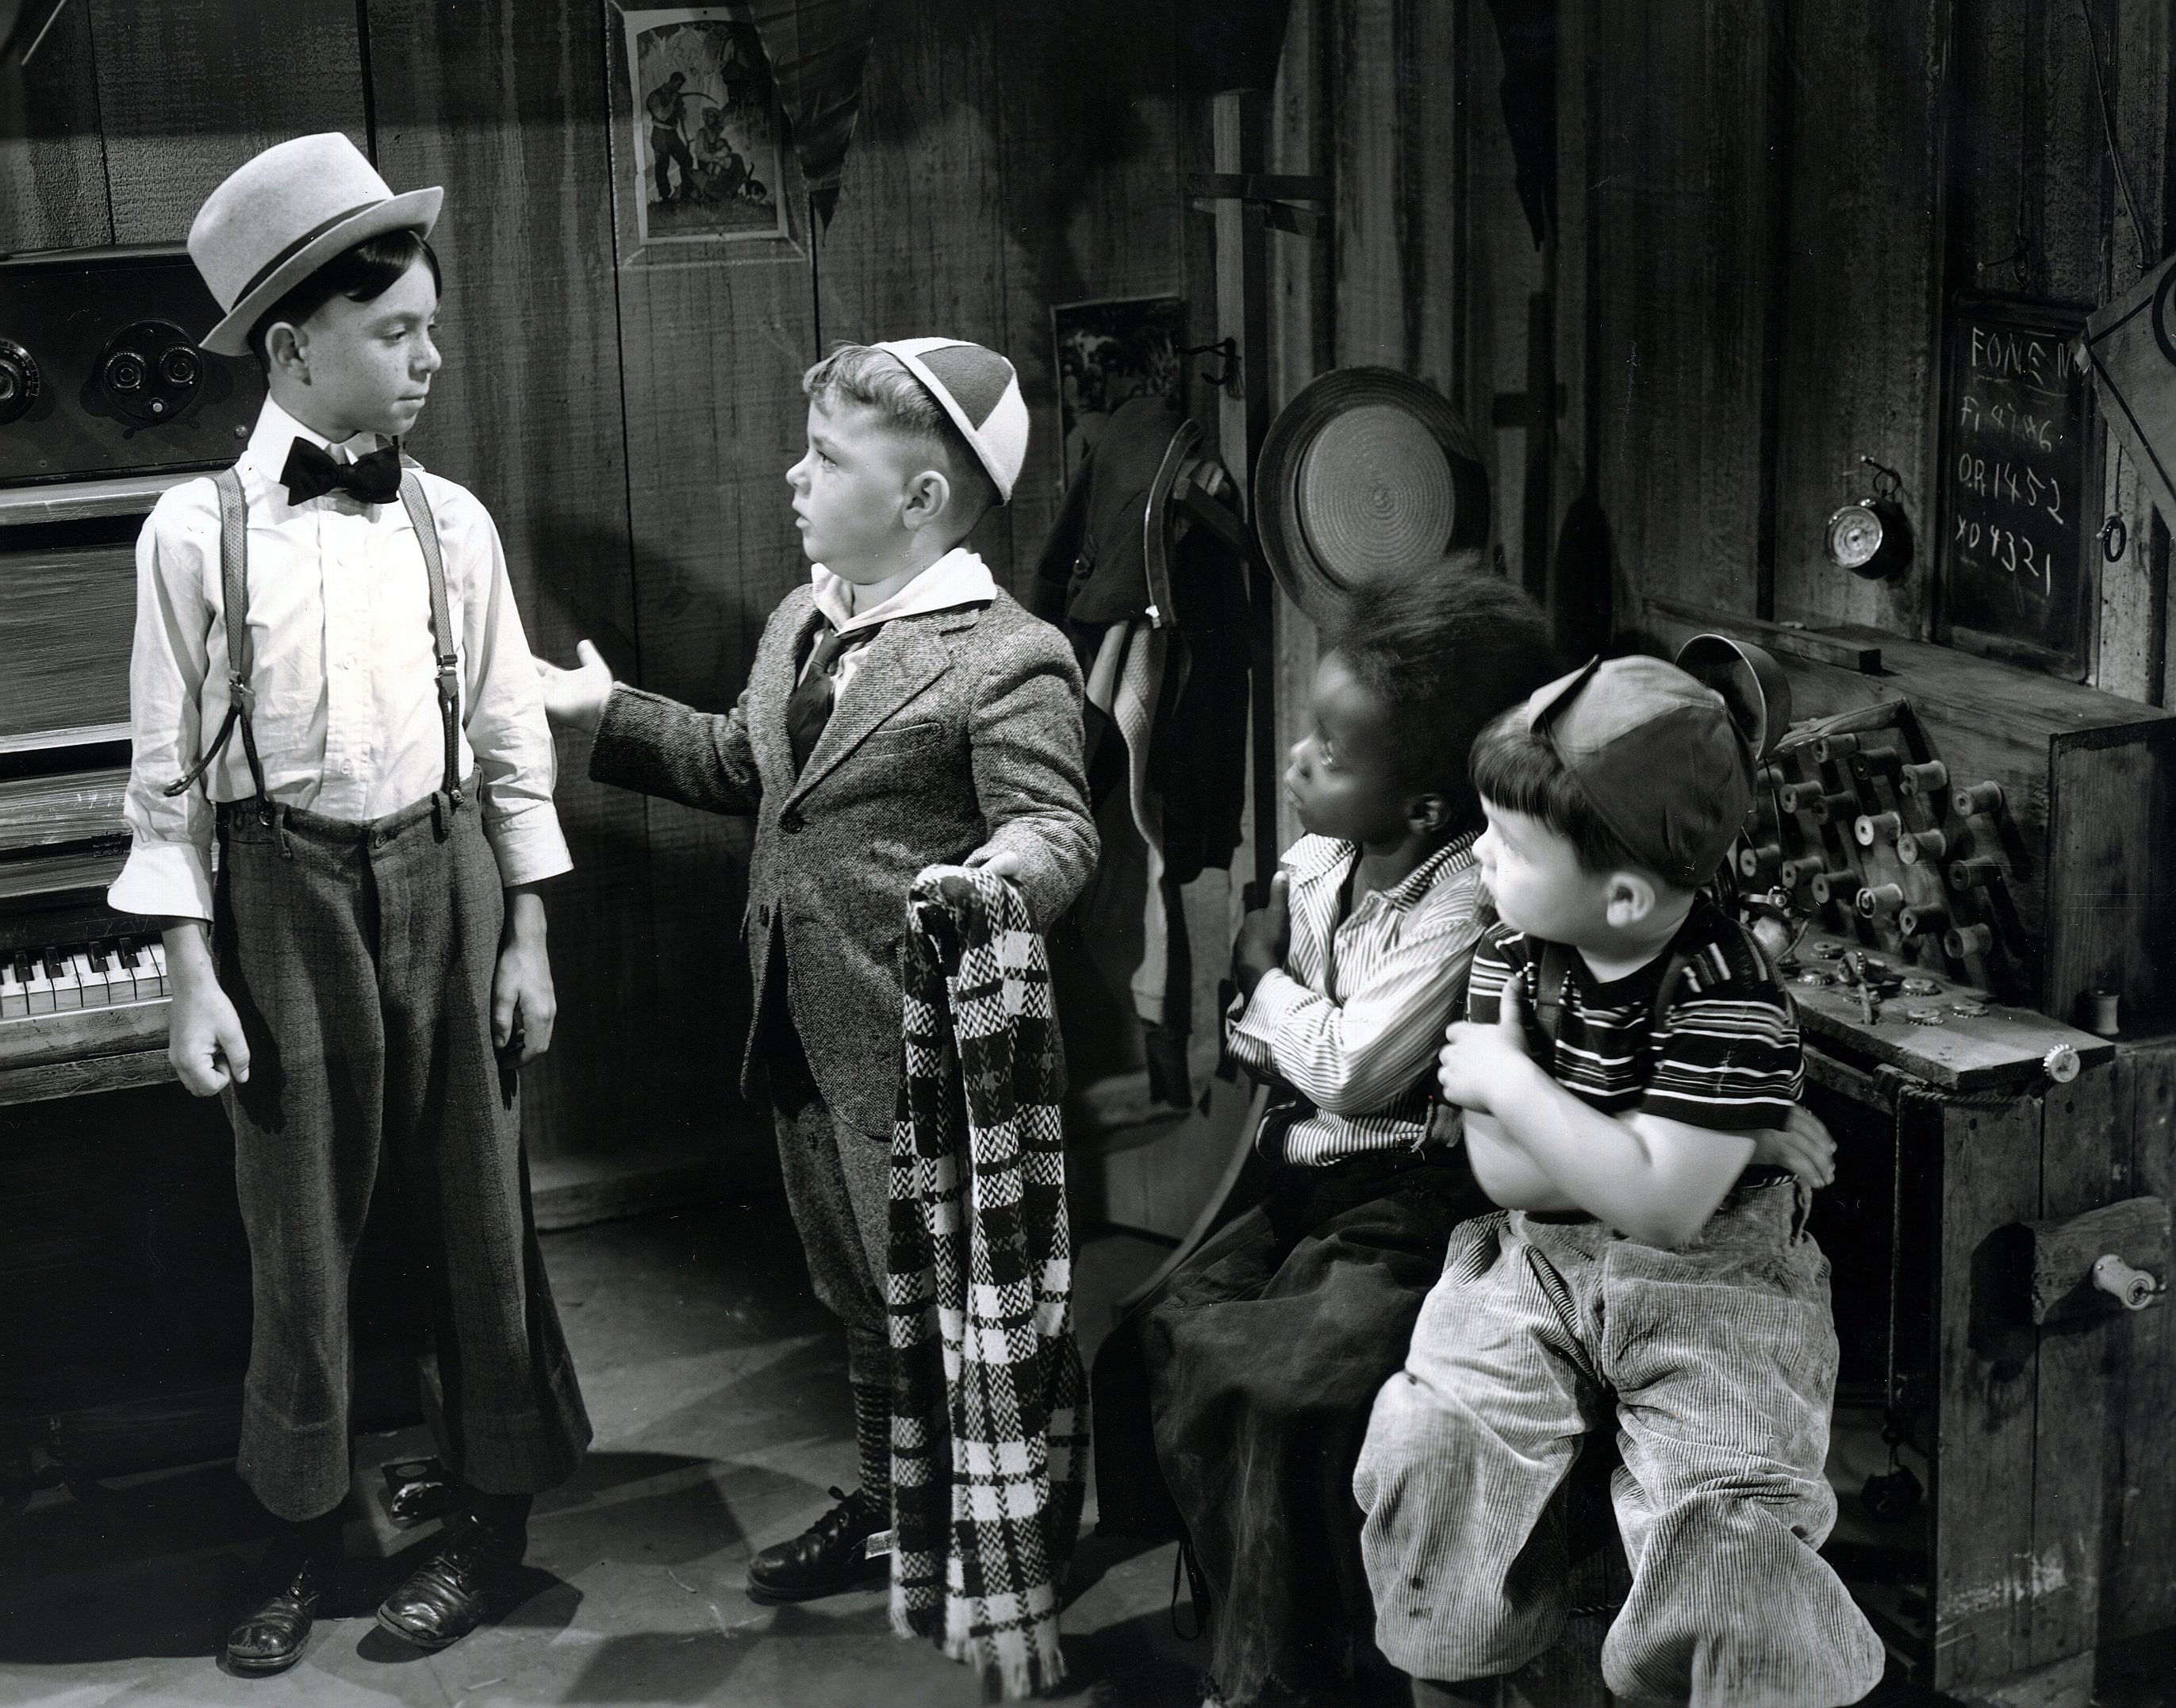 Carl Switzer as Alfalfa, George McFarland as Spanky, Billie Thomas as Buckwheat and Eugene Lee as Porky in "Framing Youth," one of The Our Gang series, later to be know as The Little Rascals. Original release was September 11, 1937. | Source: Getty Images